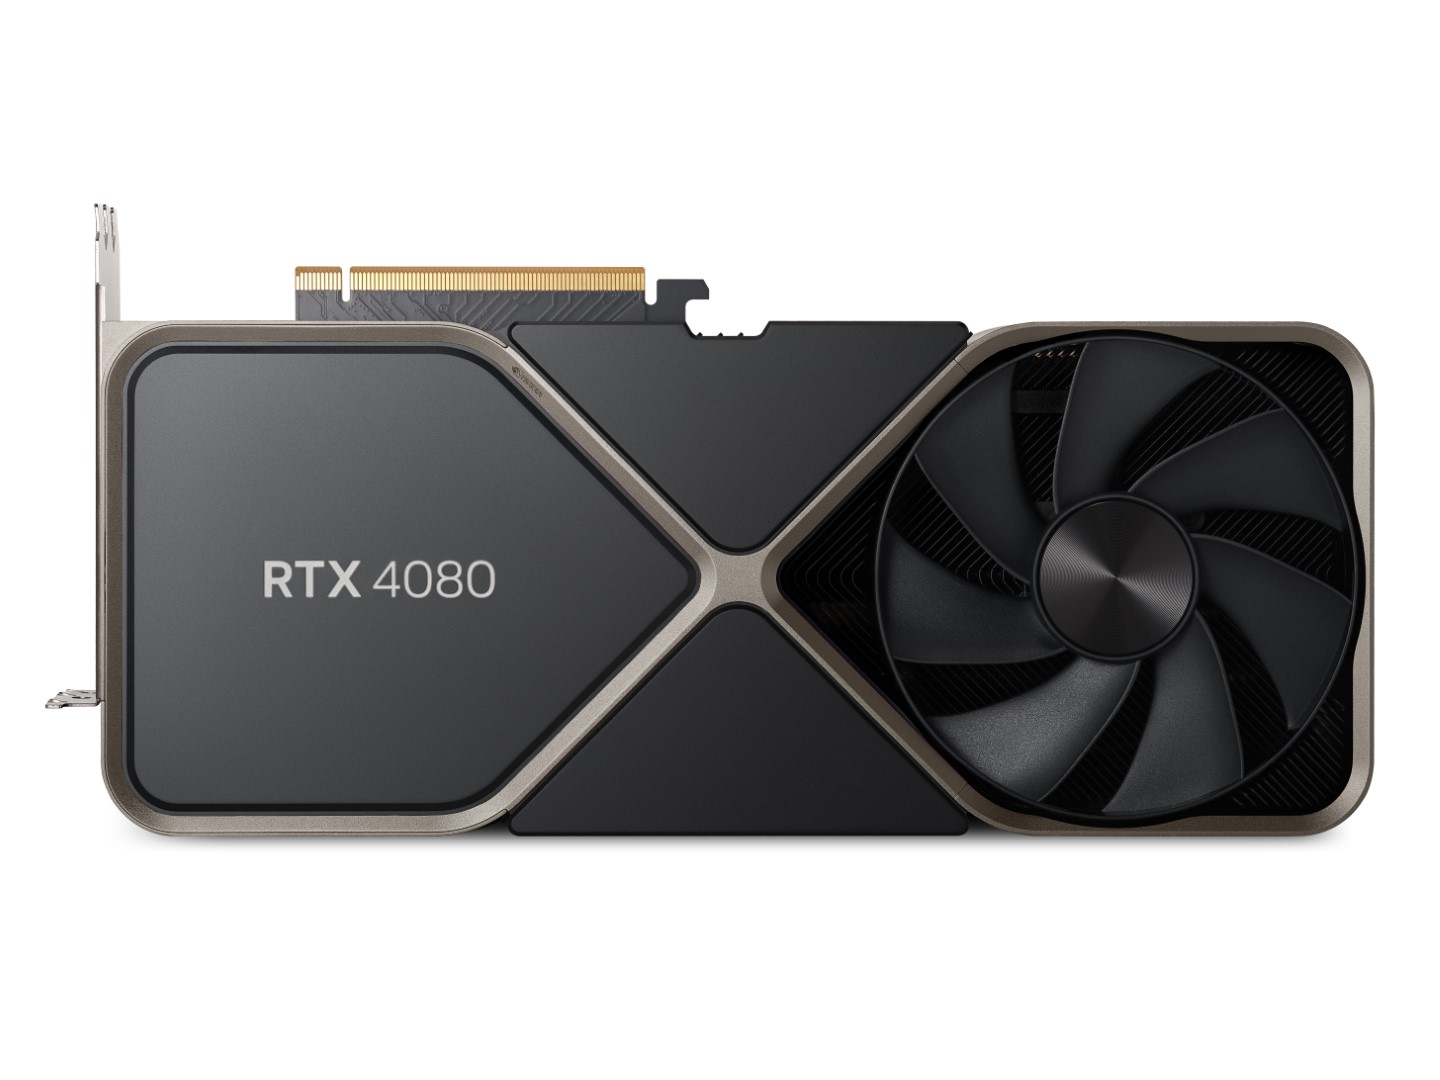 NVIDIA GeForce RTX 4060 8 GB in a complete Review - What you couldn't learn  on  until now